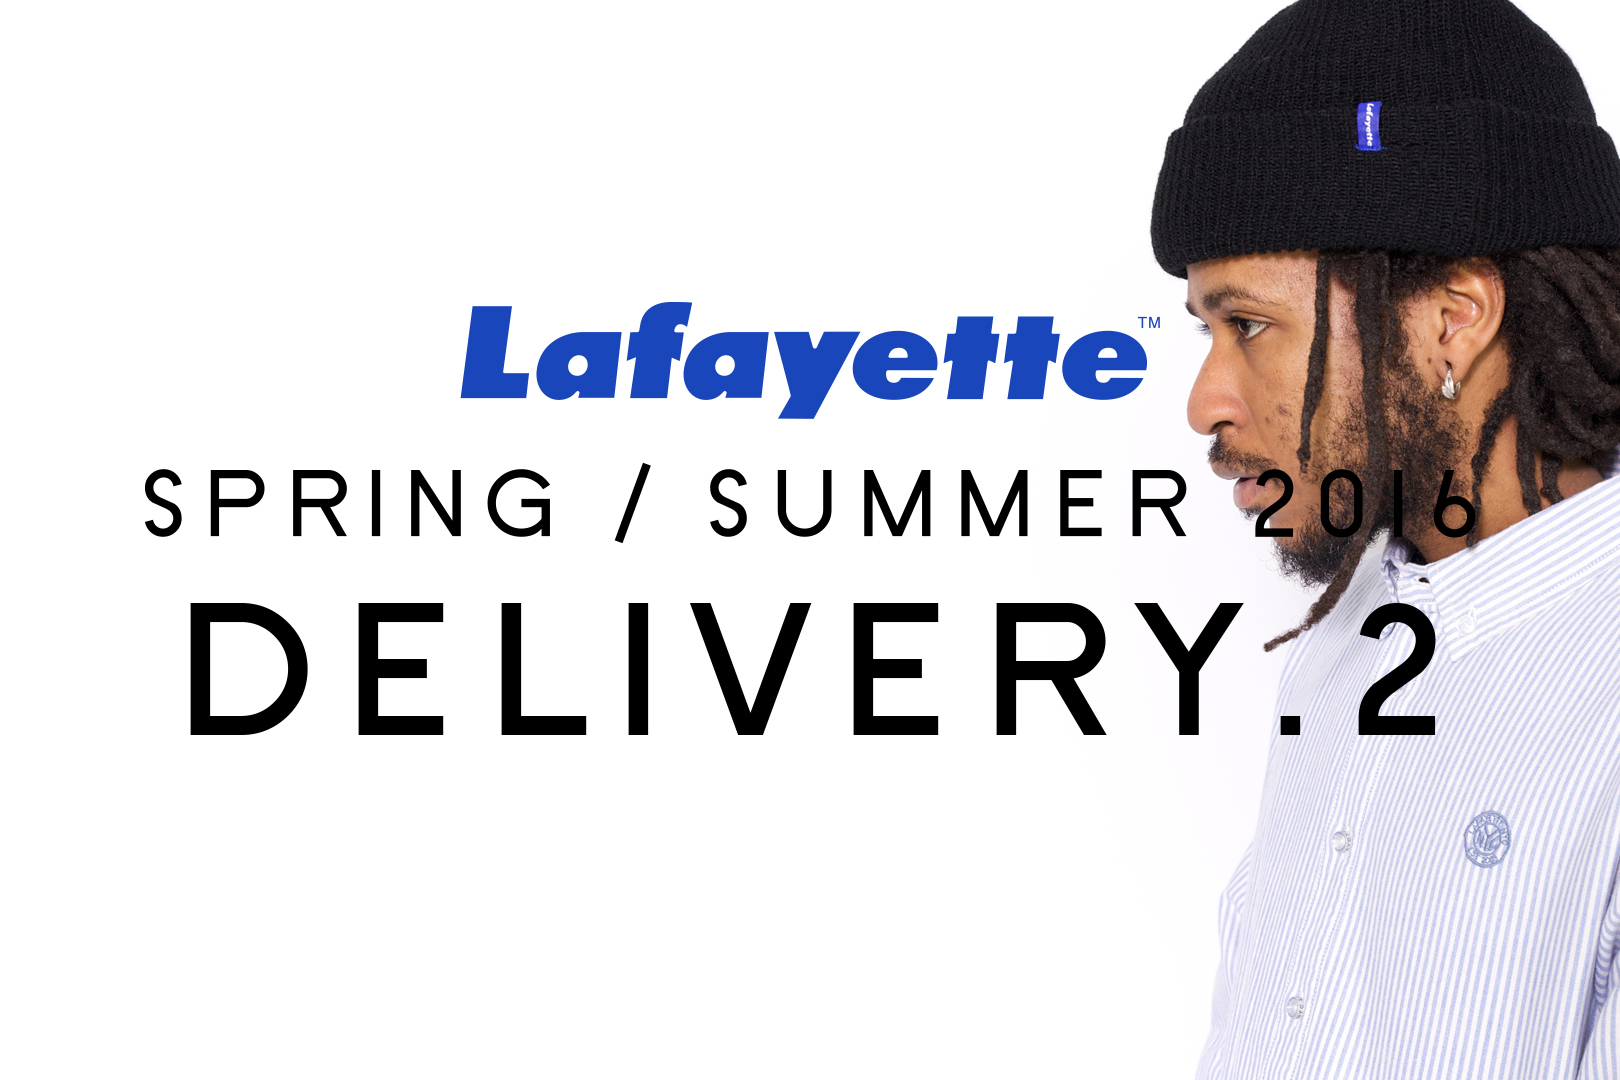 Lafayette Spring/Summer Collection 2016 DELIVERY.2